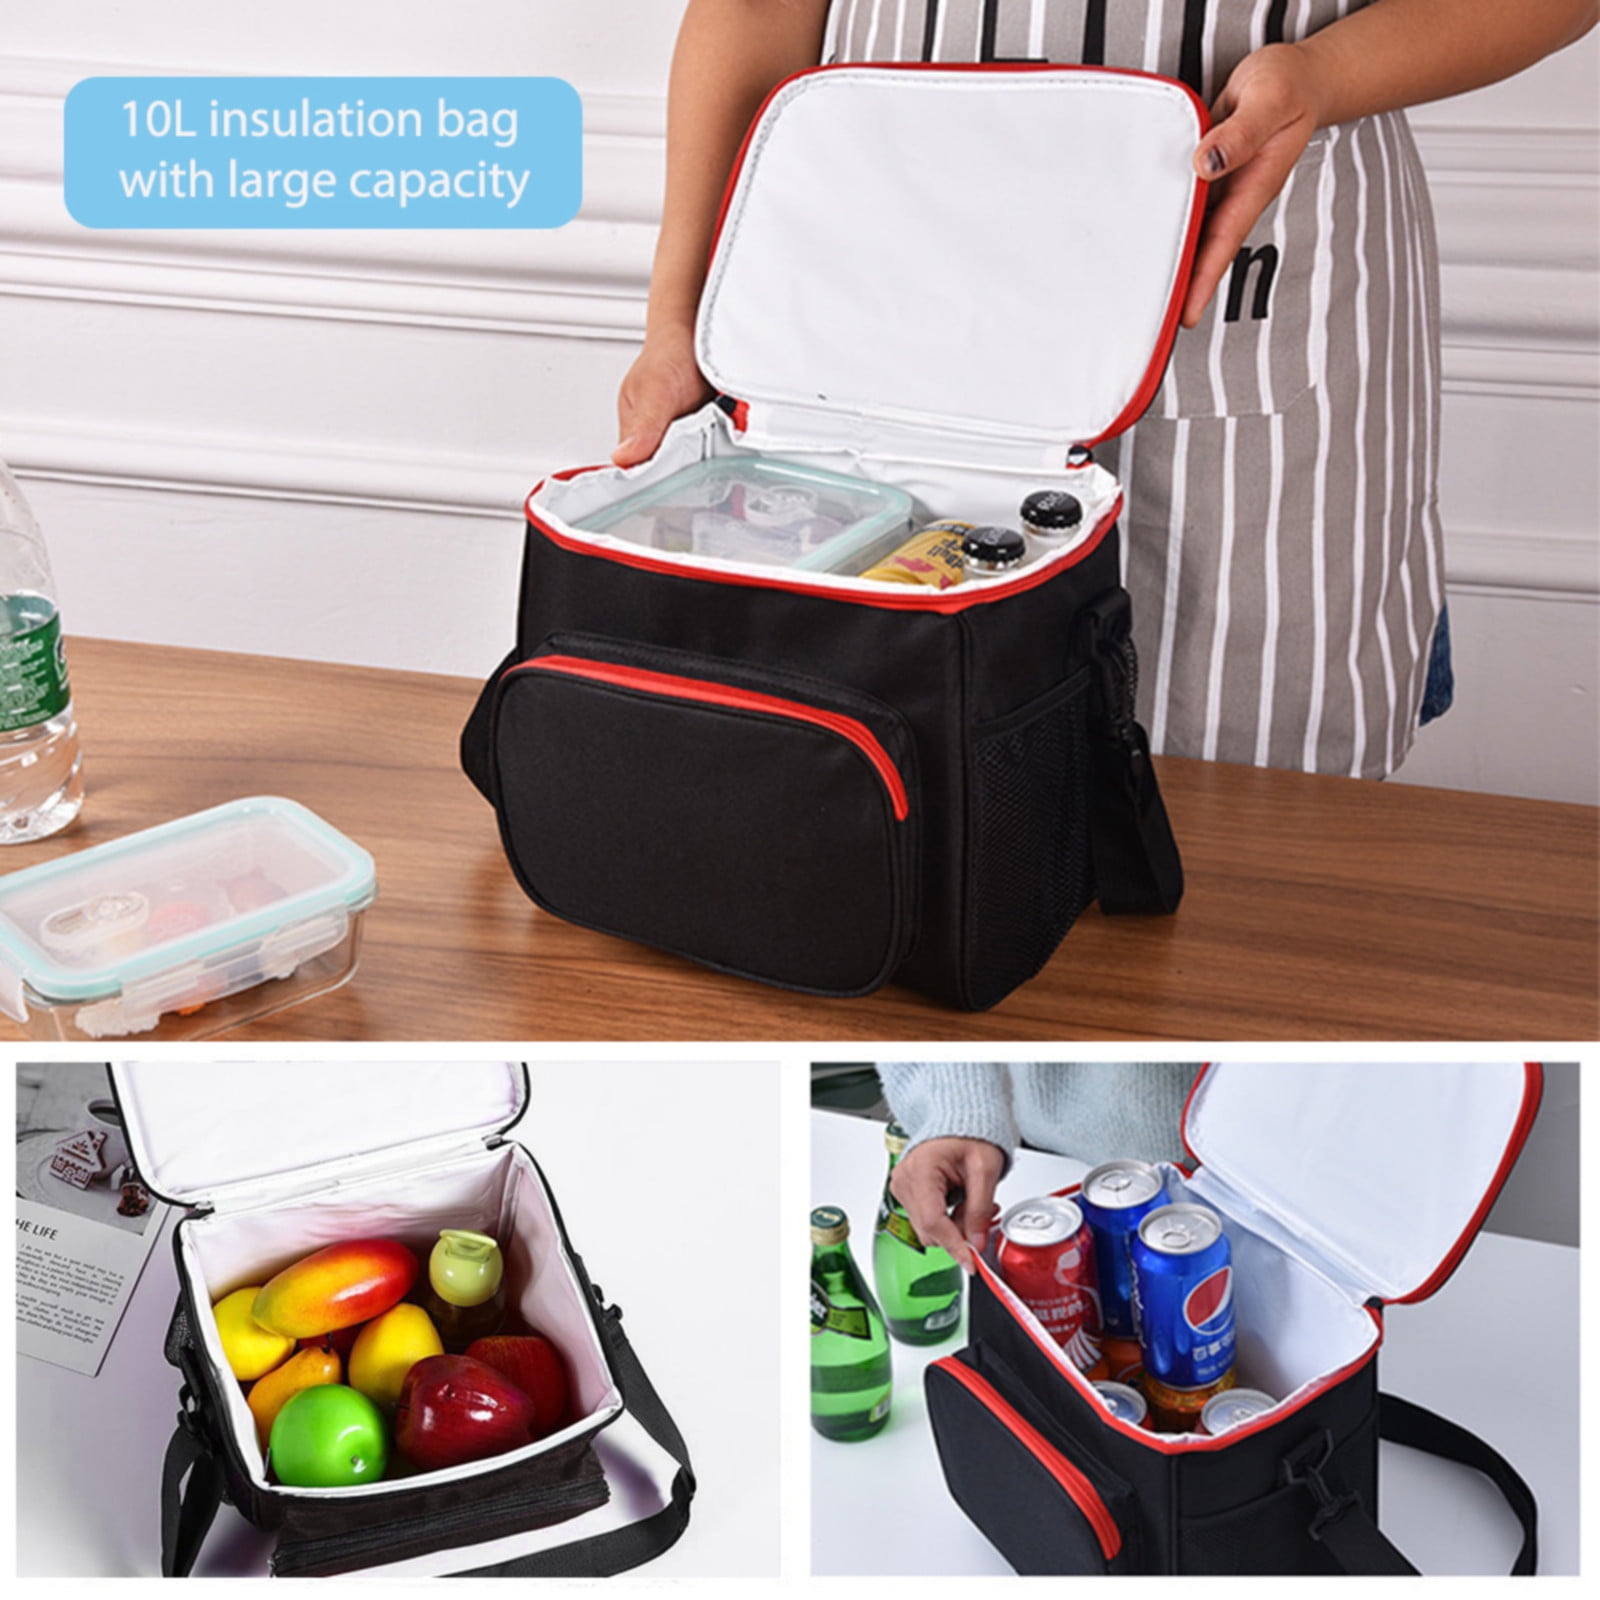 AmHoo Insulated Lunch Box Cooler Backpack Waterproof Leak-proof Lunch Bag  Tote For Men Women Hiking Beach Picnic Trip with Strongest YKK Zipper Gray